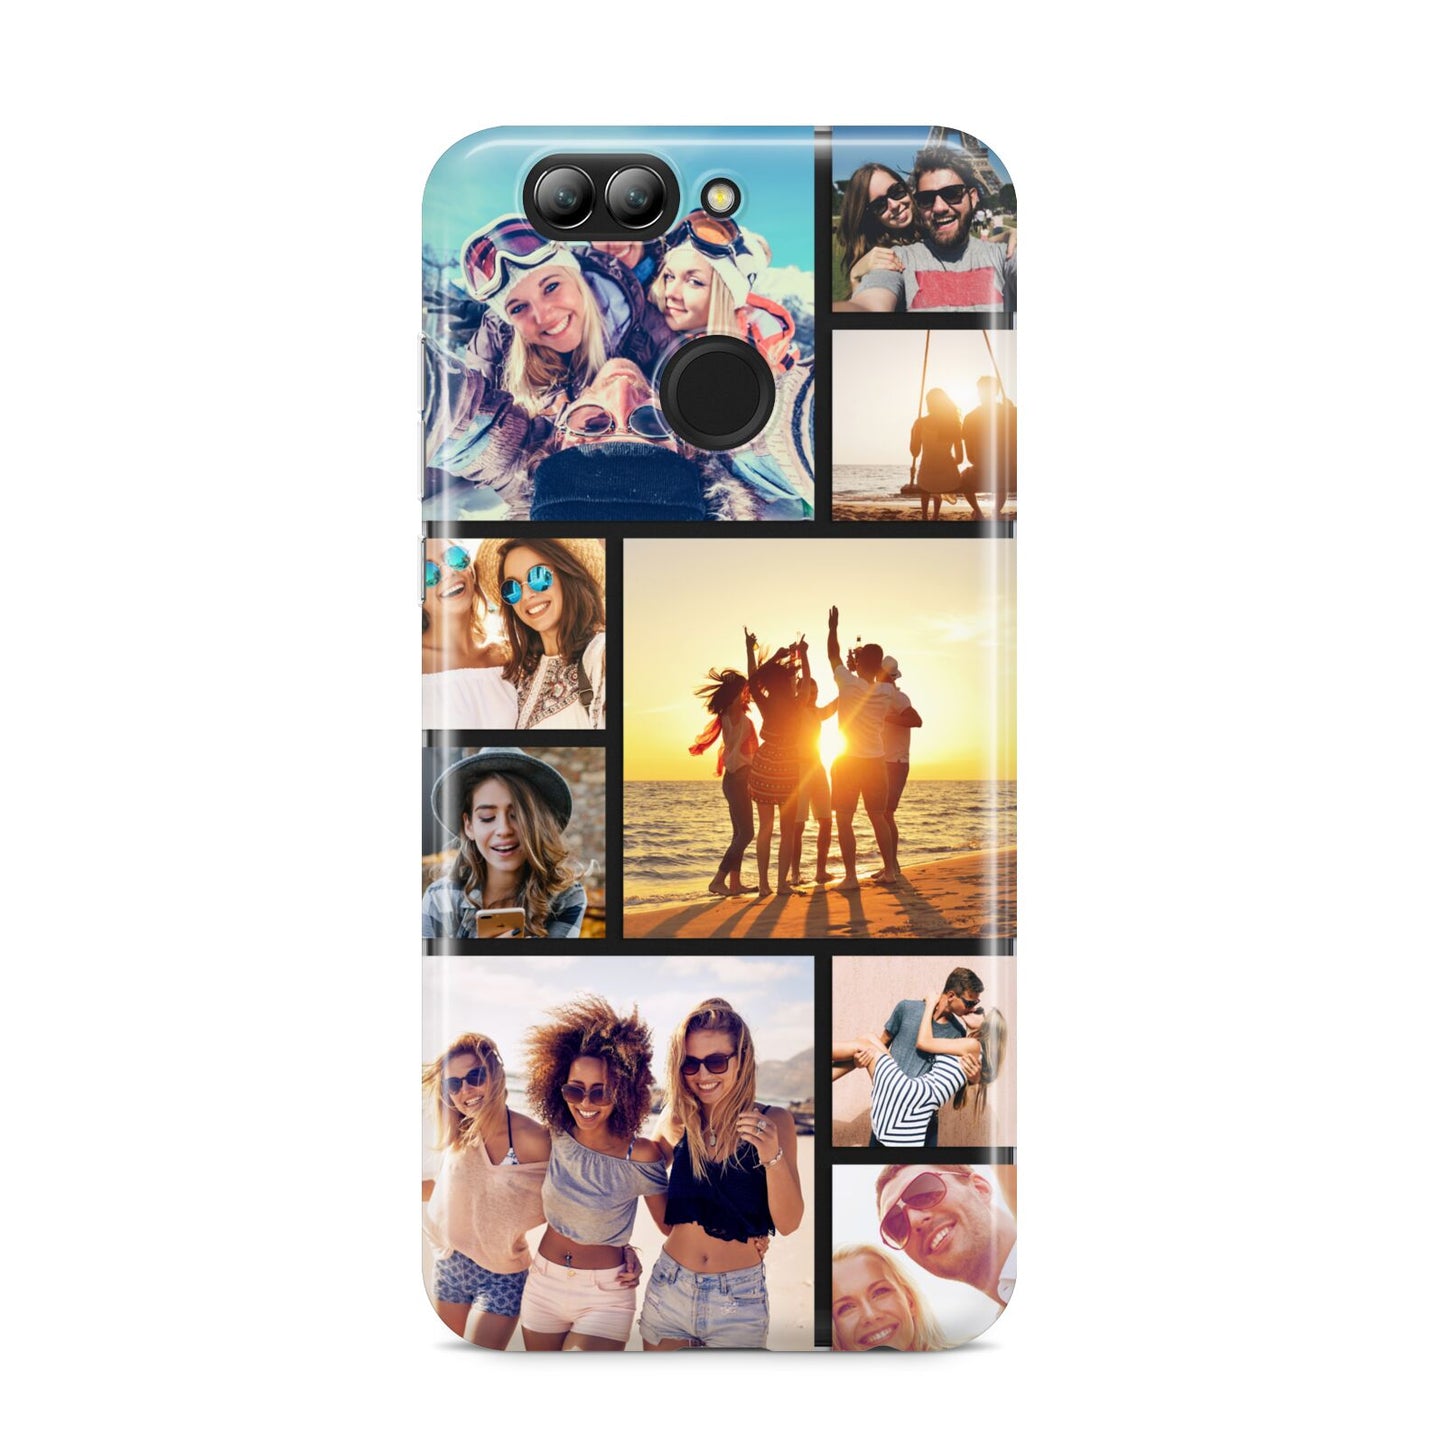 Abstract Photo Collage Upload Huawei Nova 2s Phone Case